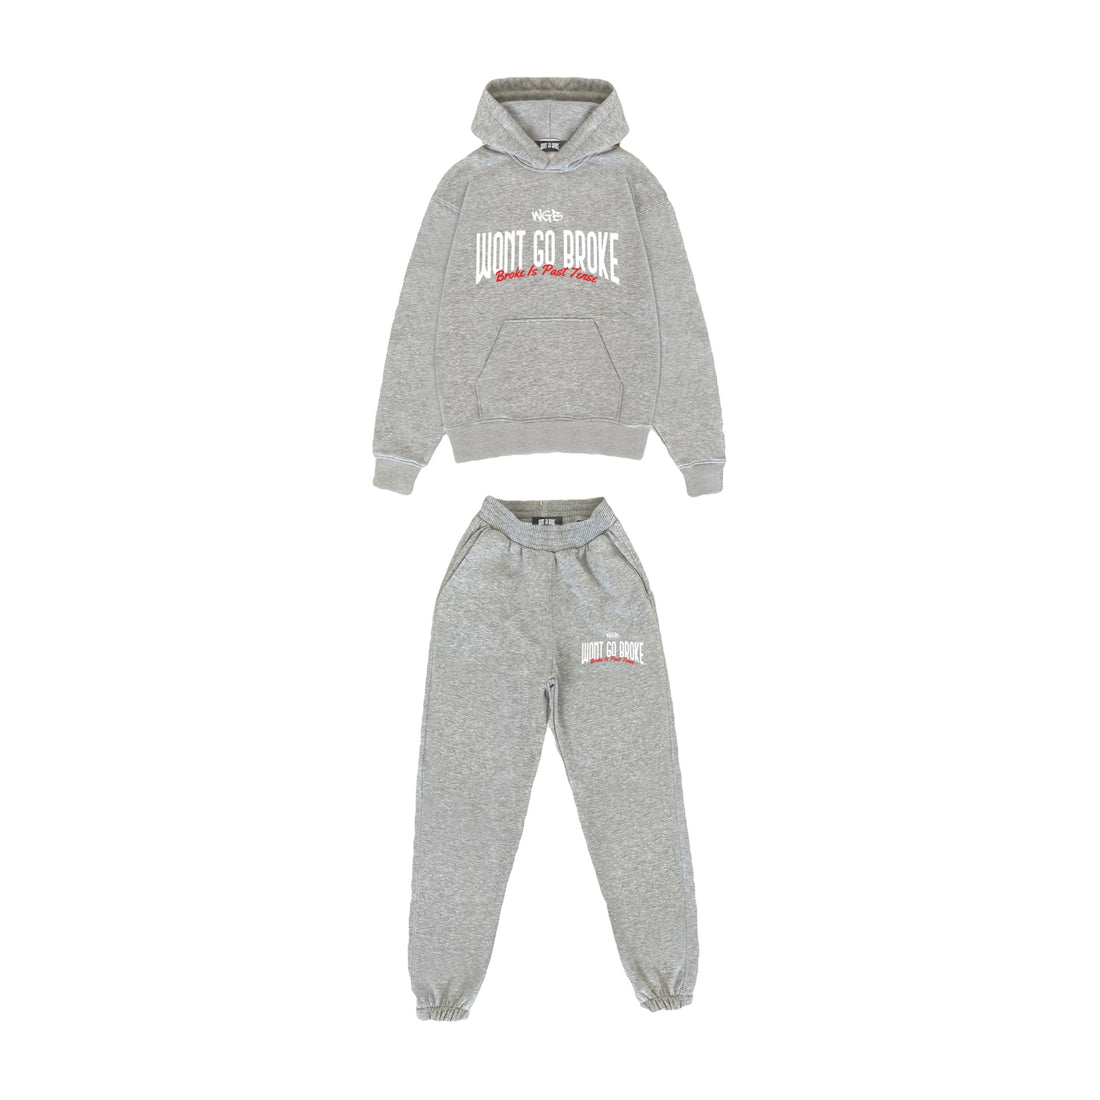 “BIPT” Tracksuit - Grey/Red